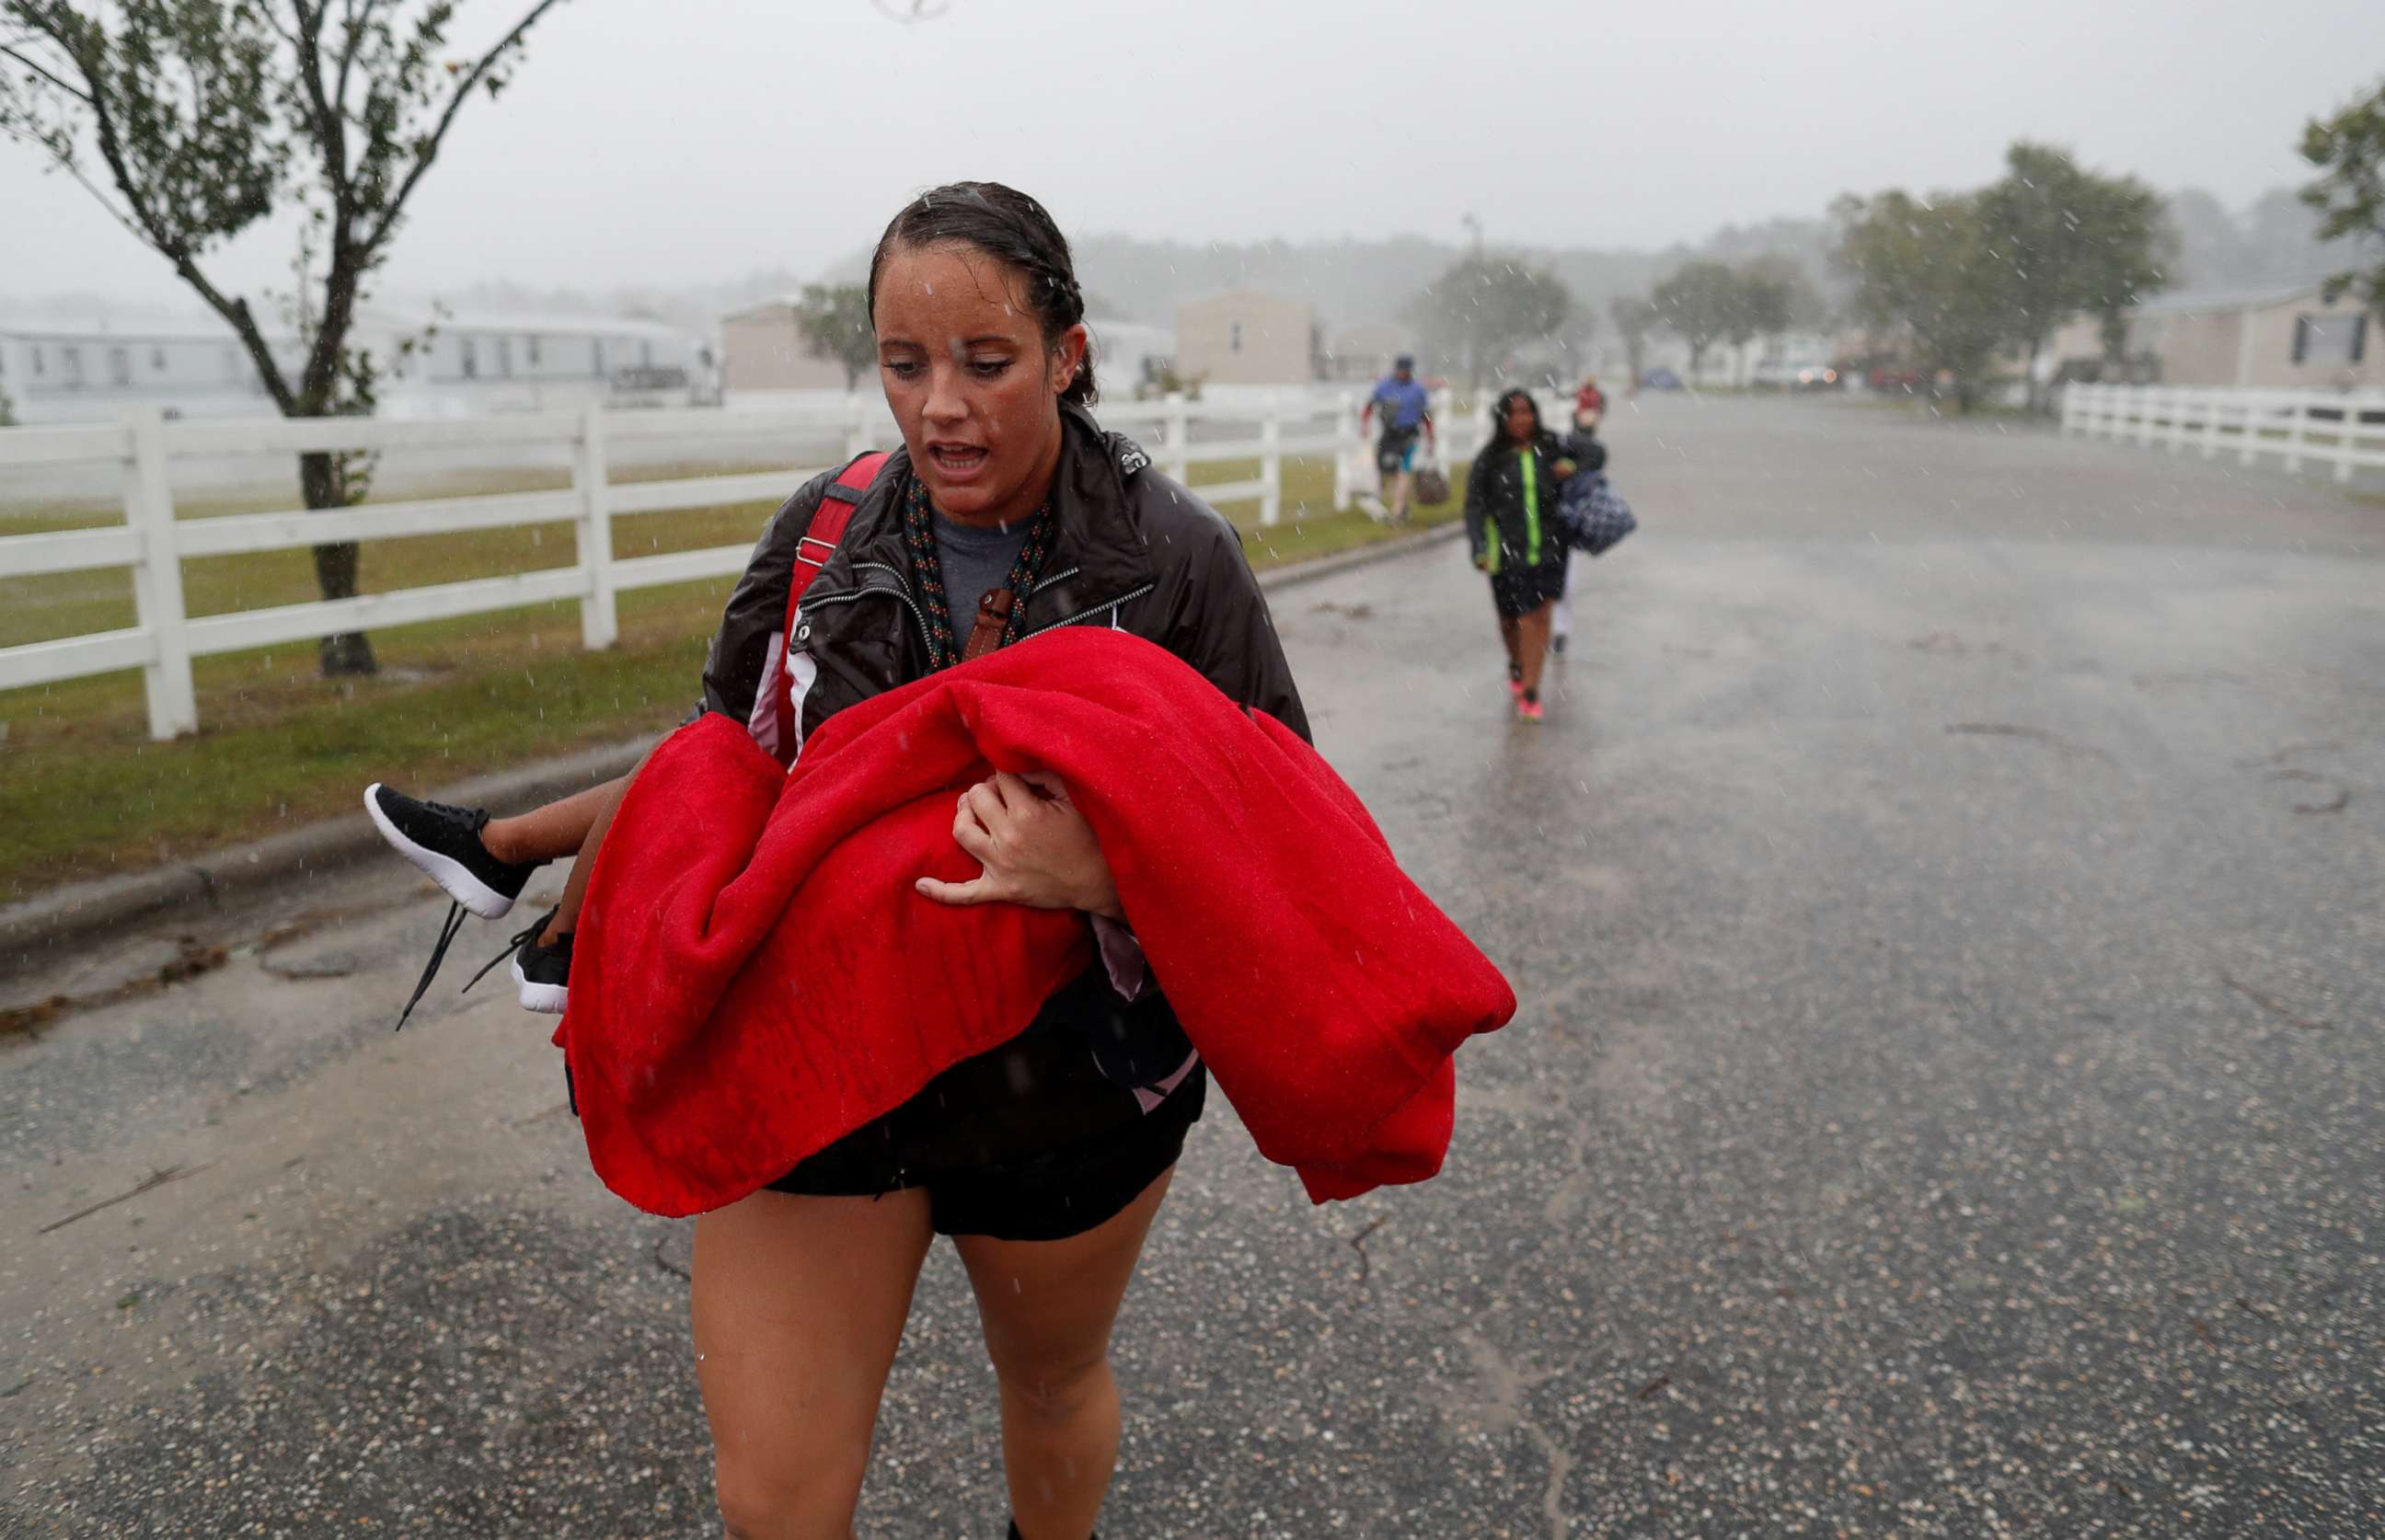 PHOTO: During a driving rain, Maggie Belgie of The Cajun Navy carries a child evacuating a flooding trailer community during Hurricane Florence in Lumberton, N.C., Sept. 15, 2018.